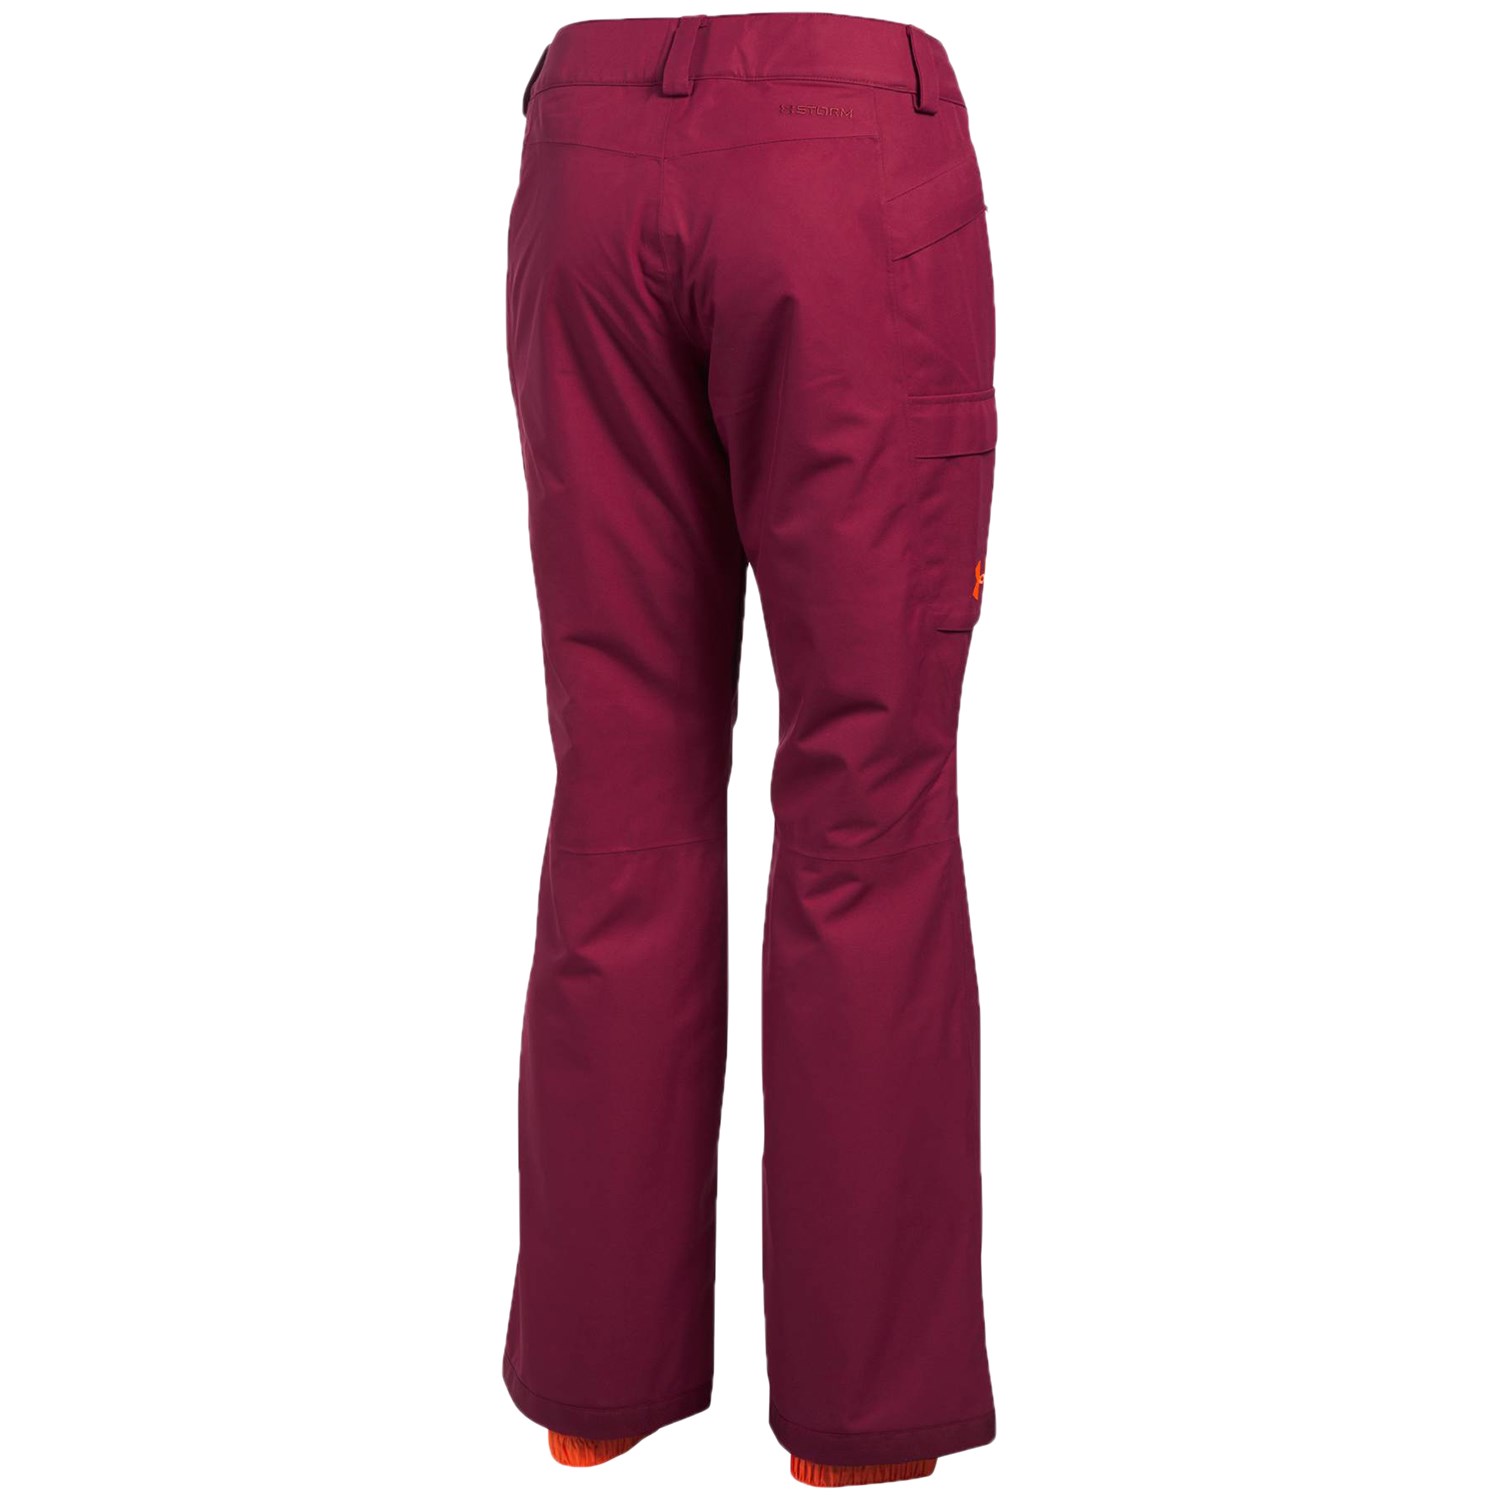 Under Armour ColdGear Infrared Chutes Pants Girls' Evo, 41% OFF